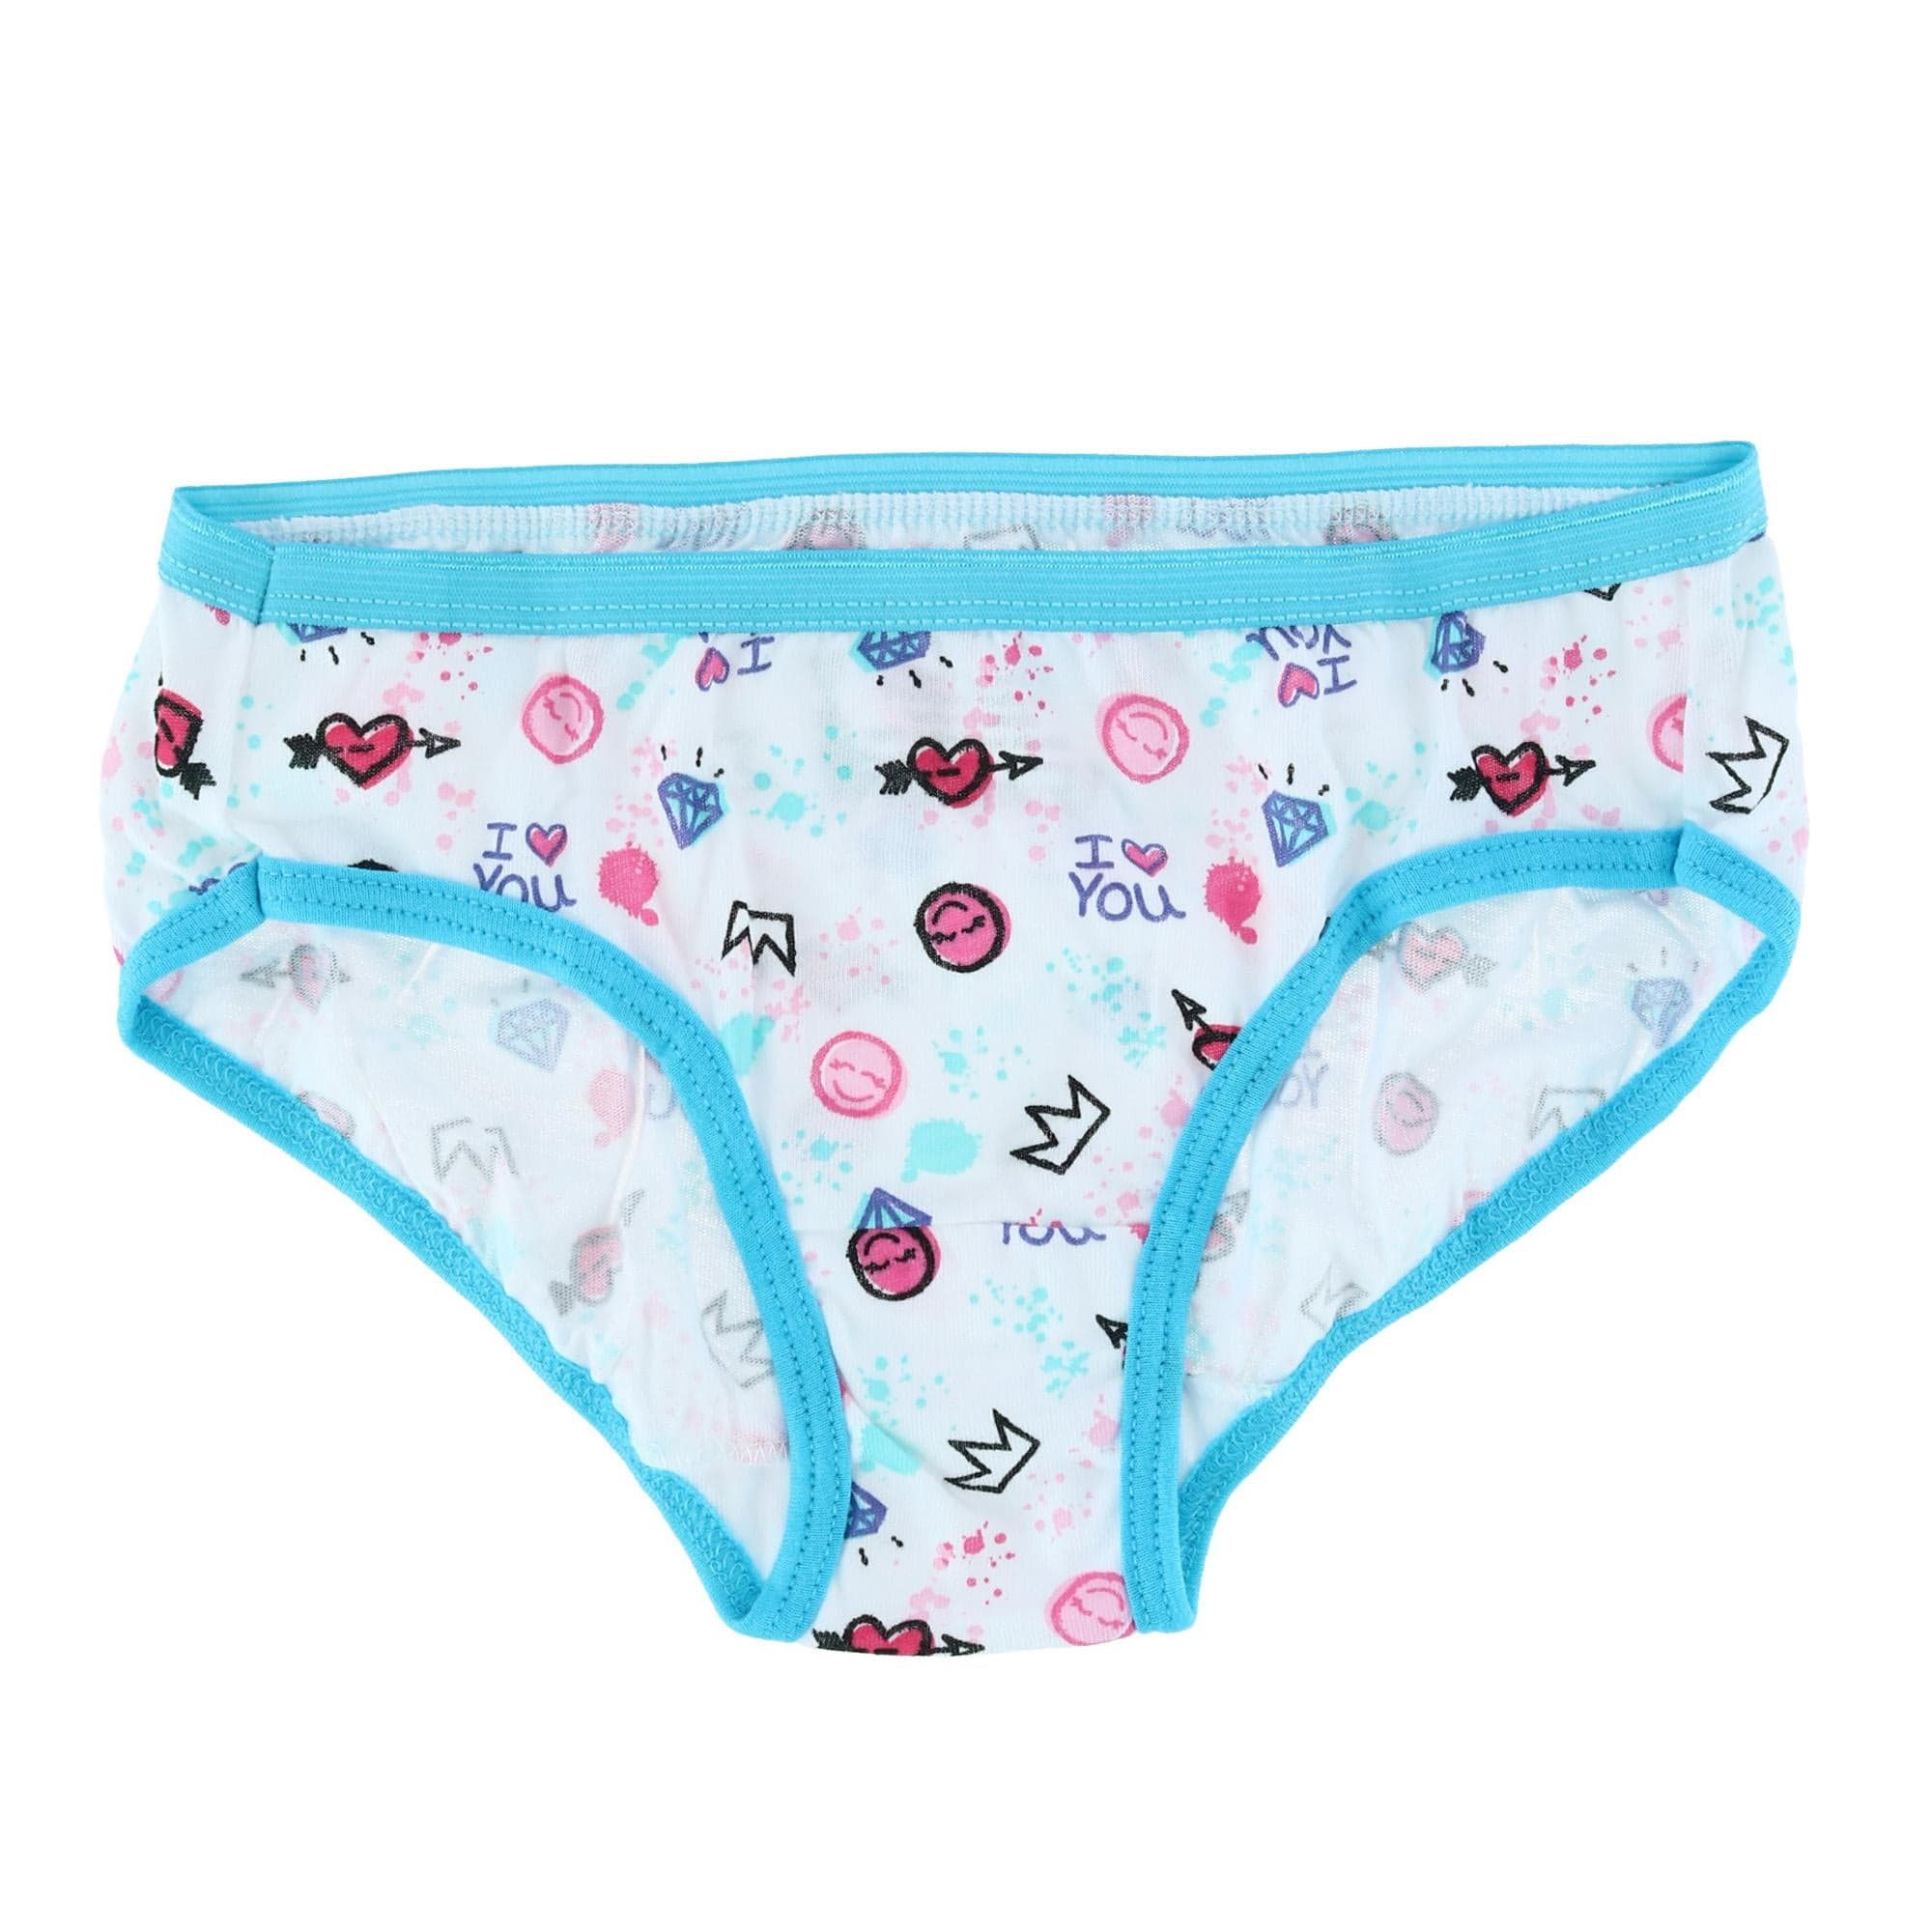 Girls' Cotton Hipster Panties (10 Pack) - Colorful Hearts